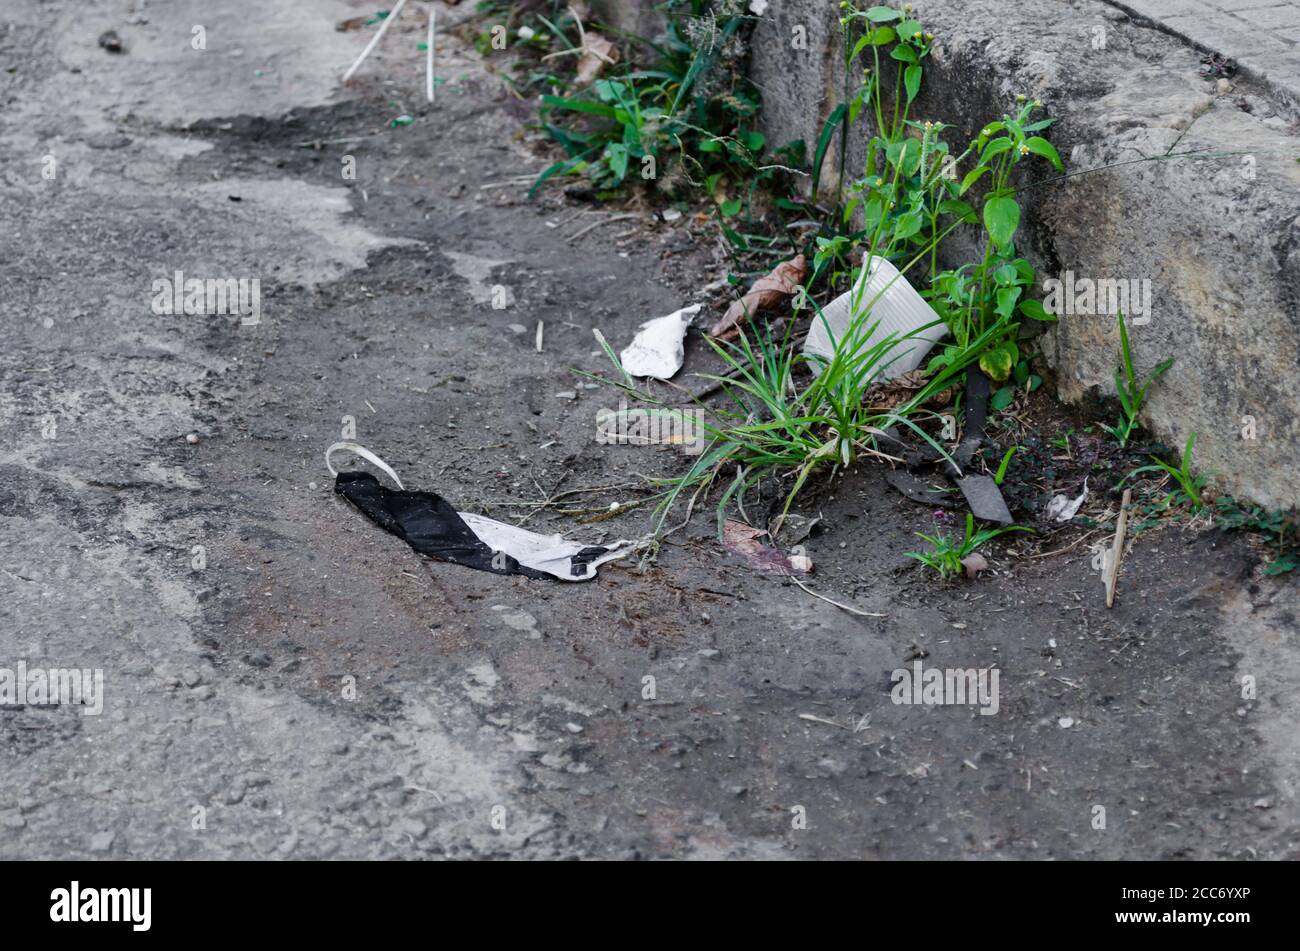 homemade protection mask thrown on the street beside other garbage accumulating dirt on the curb. Stock Photo